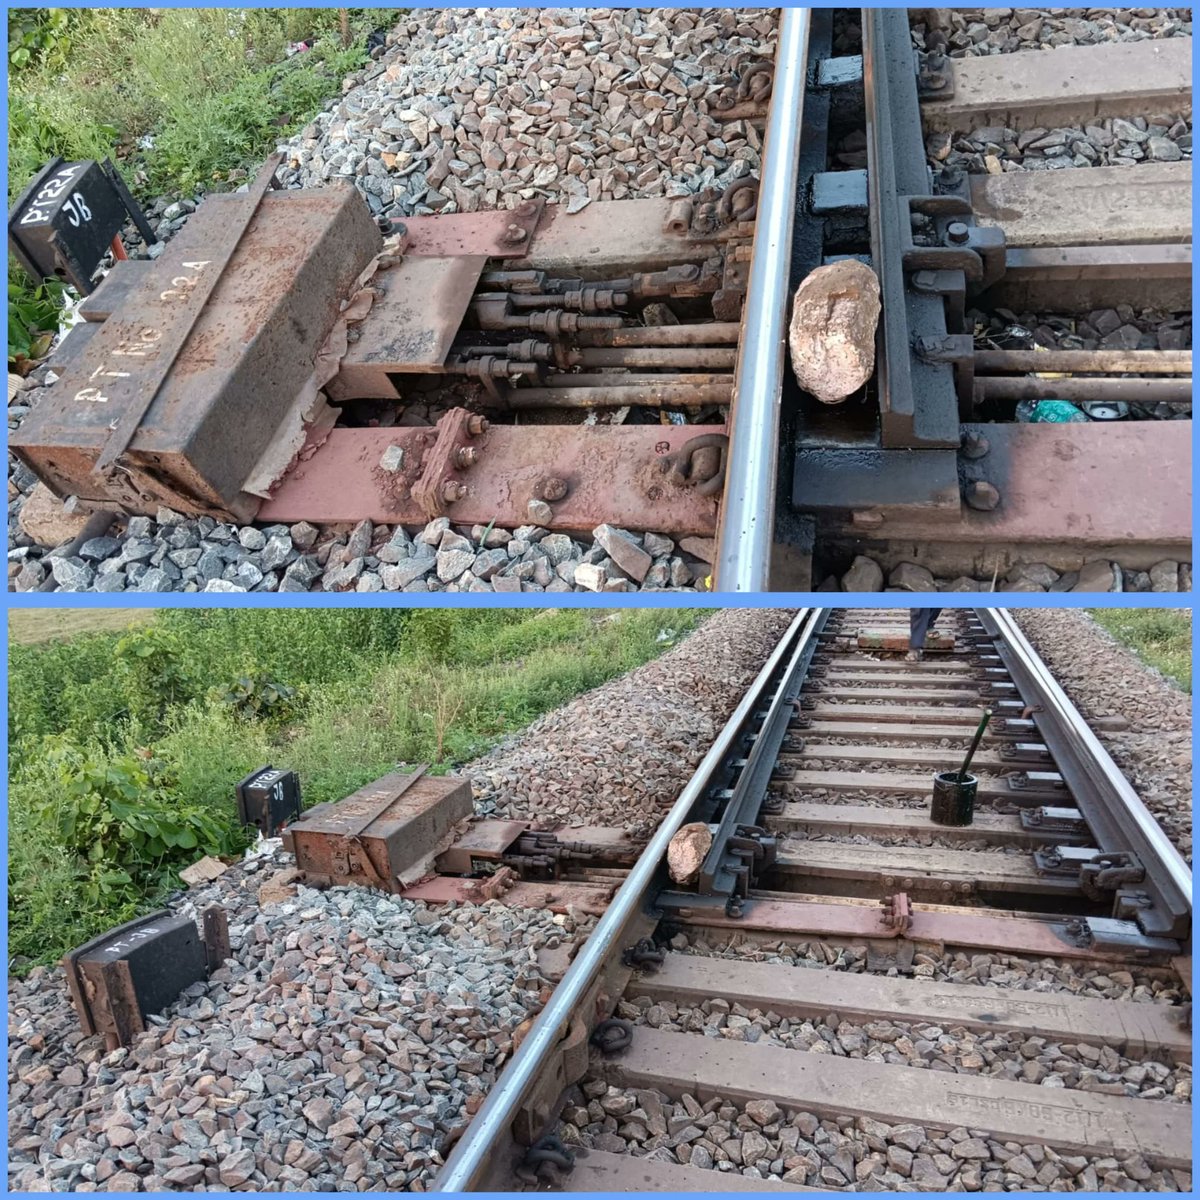 Major train accident averted in Bhadrak, thanks to alert railway staffer. The peaceful community is trying its best to cause chaos in India. Their latest target is the Indian railways.